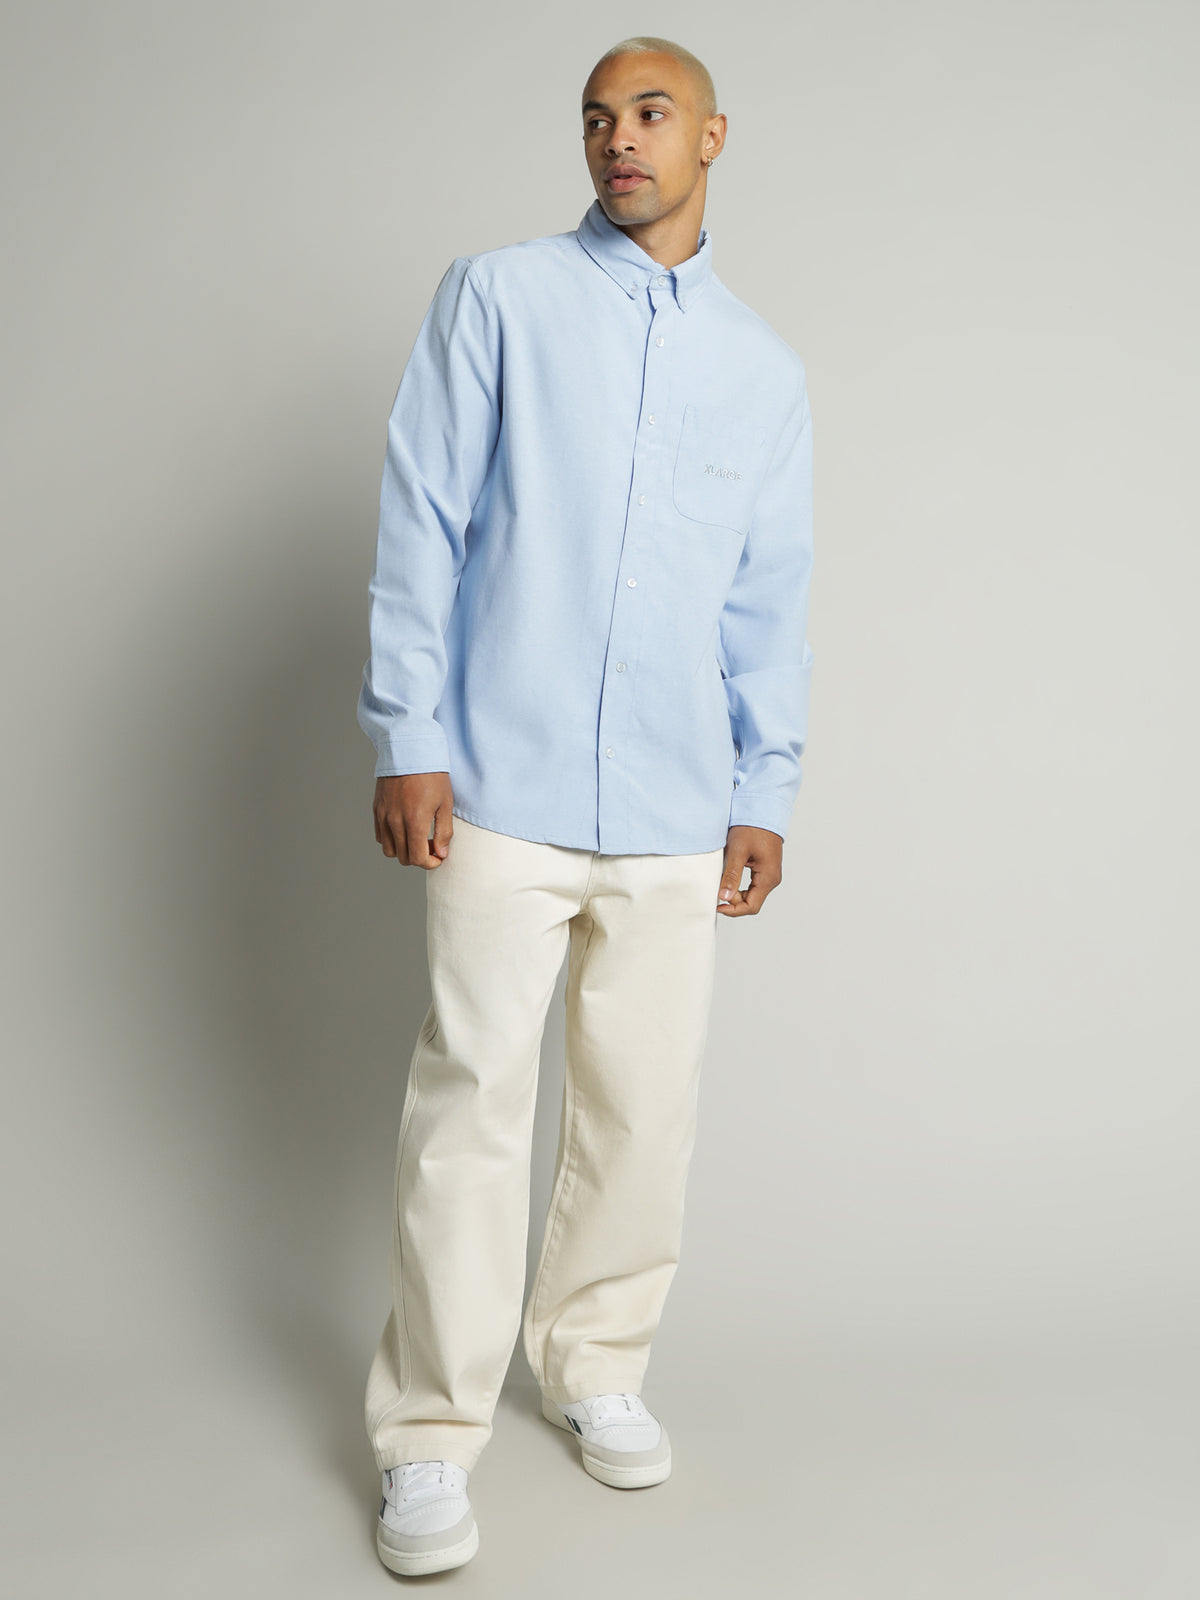 91 Oxford Long Sleeve Shirt in Blue